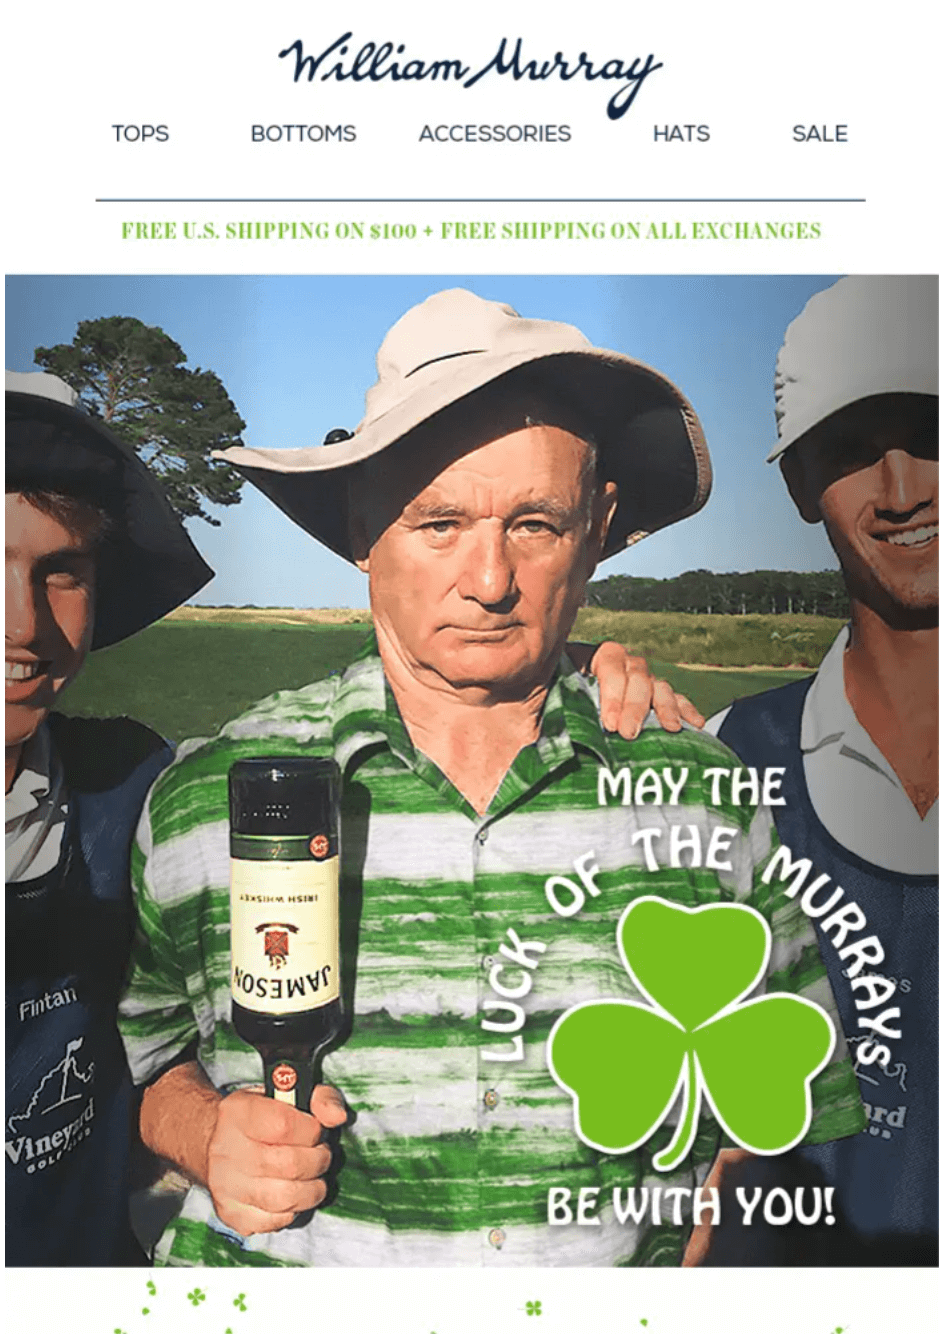 Image shows a St. Patrick’s Day marketing email from William Murray